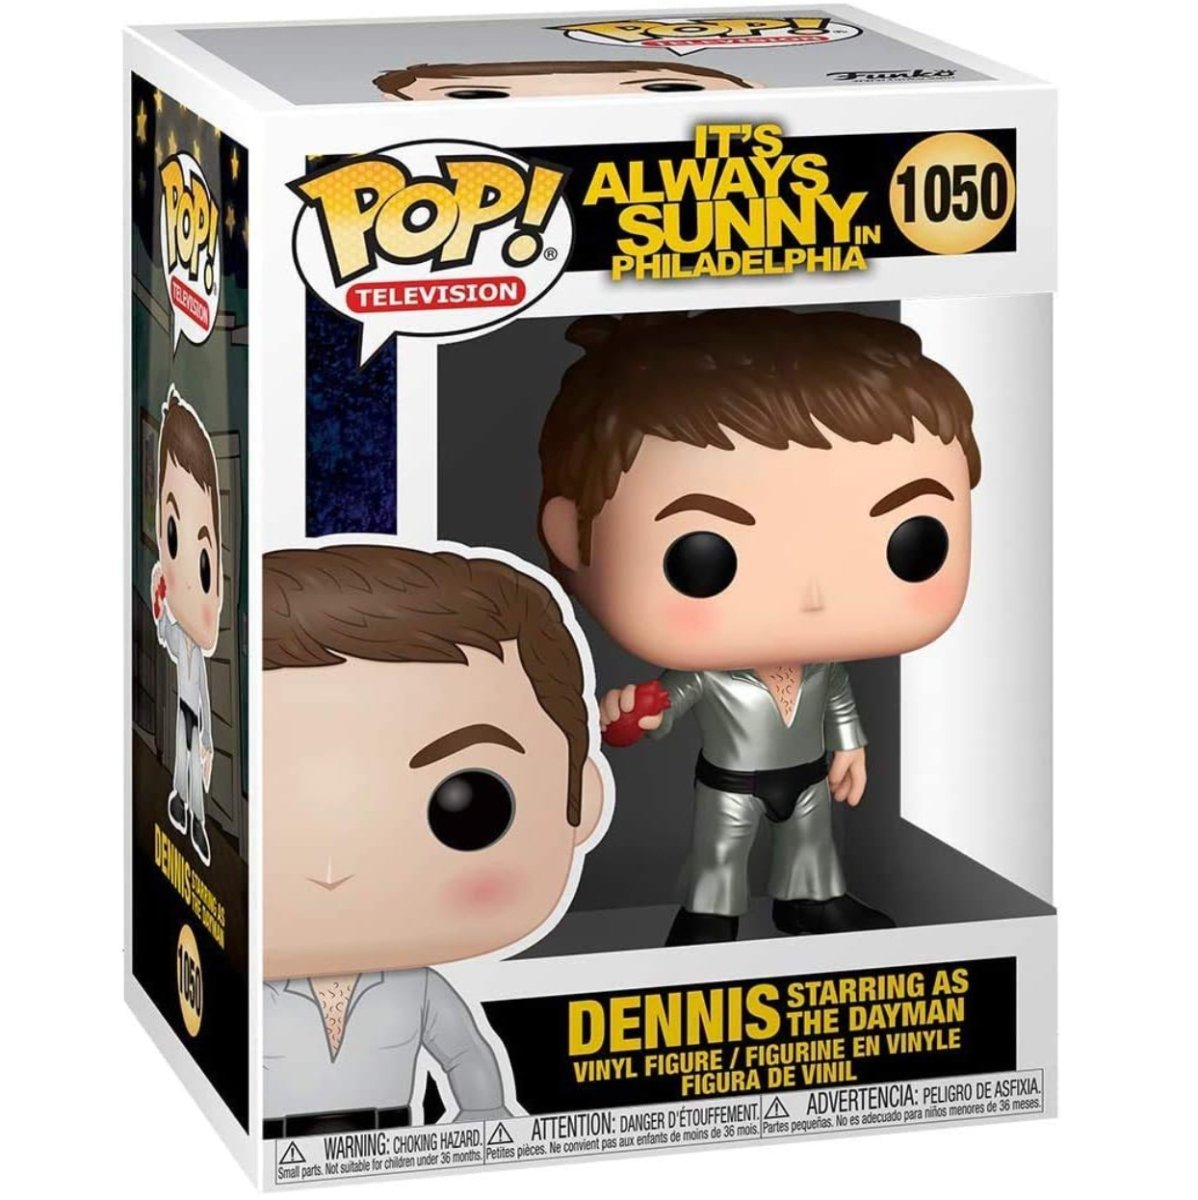 It's Always Sunny in Philadelphia - Dennis Starring as The Dayman #1050 - Funko Pop! Vinyl Television - Persona Toys